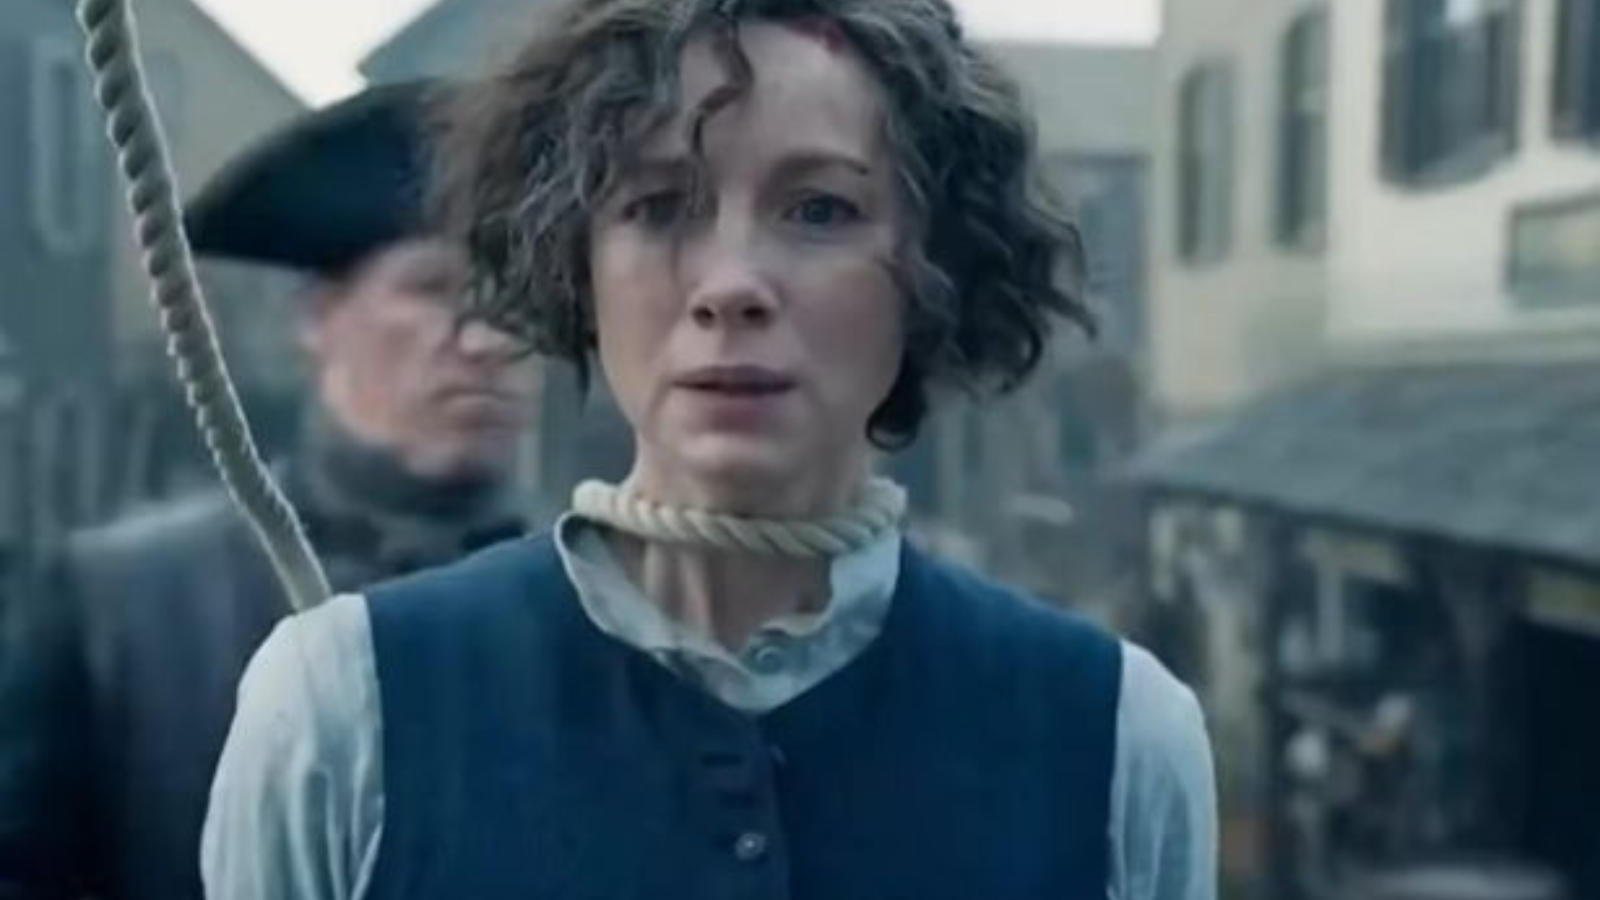 A mortified Claire Fraser (Caitriona Balfe) heroine of the fictional series Outlander standing on the scaffold with a noos aroun her neck.